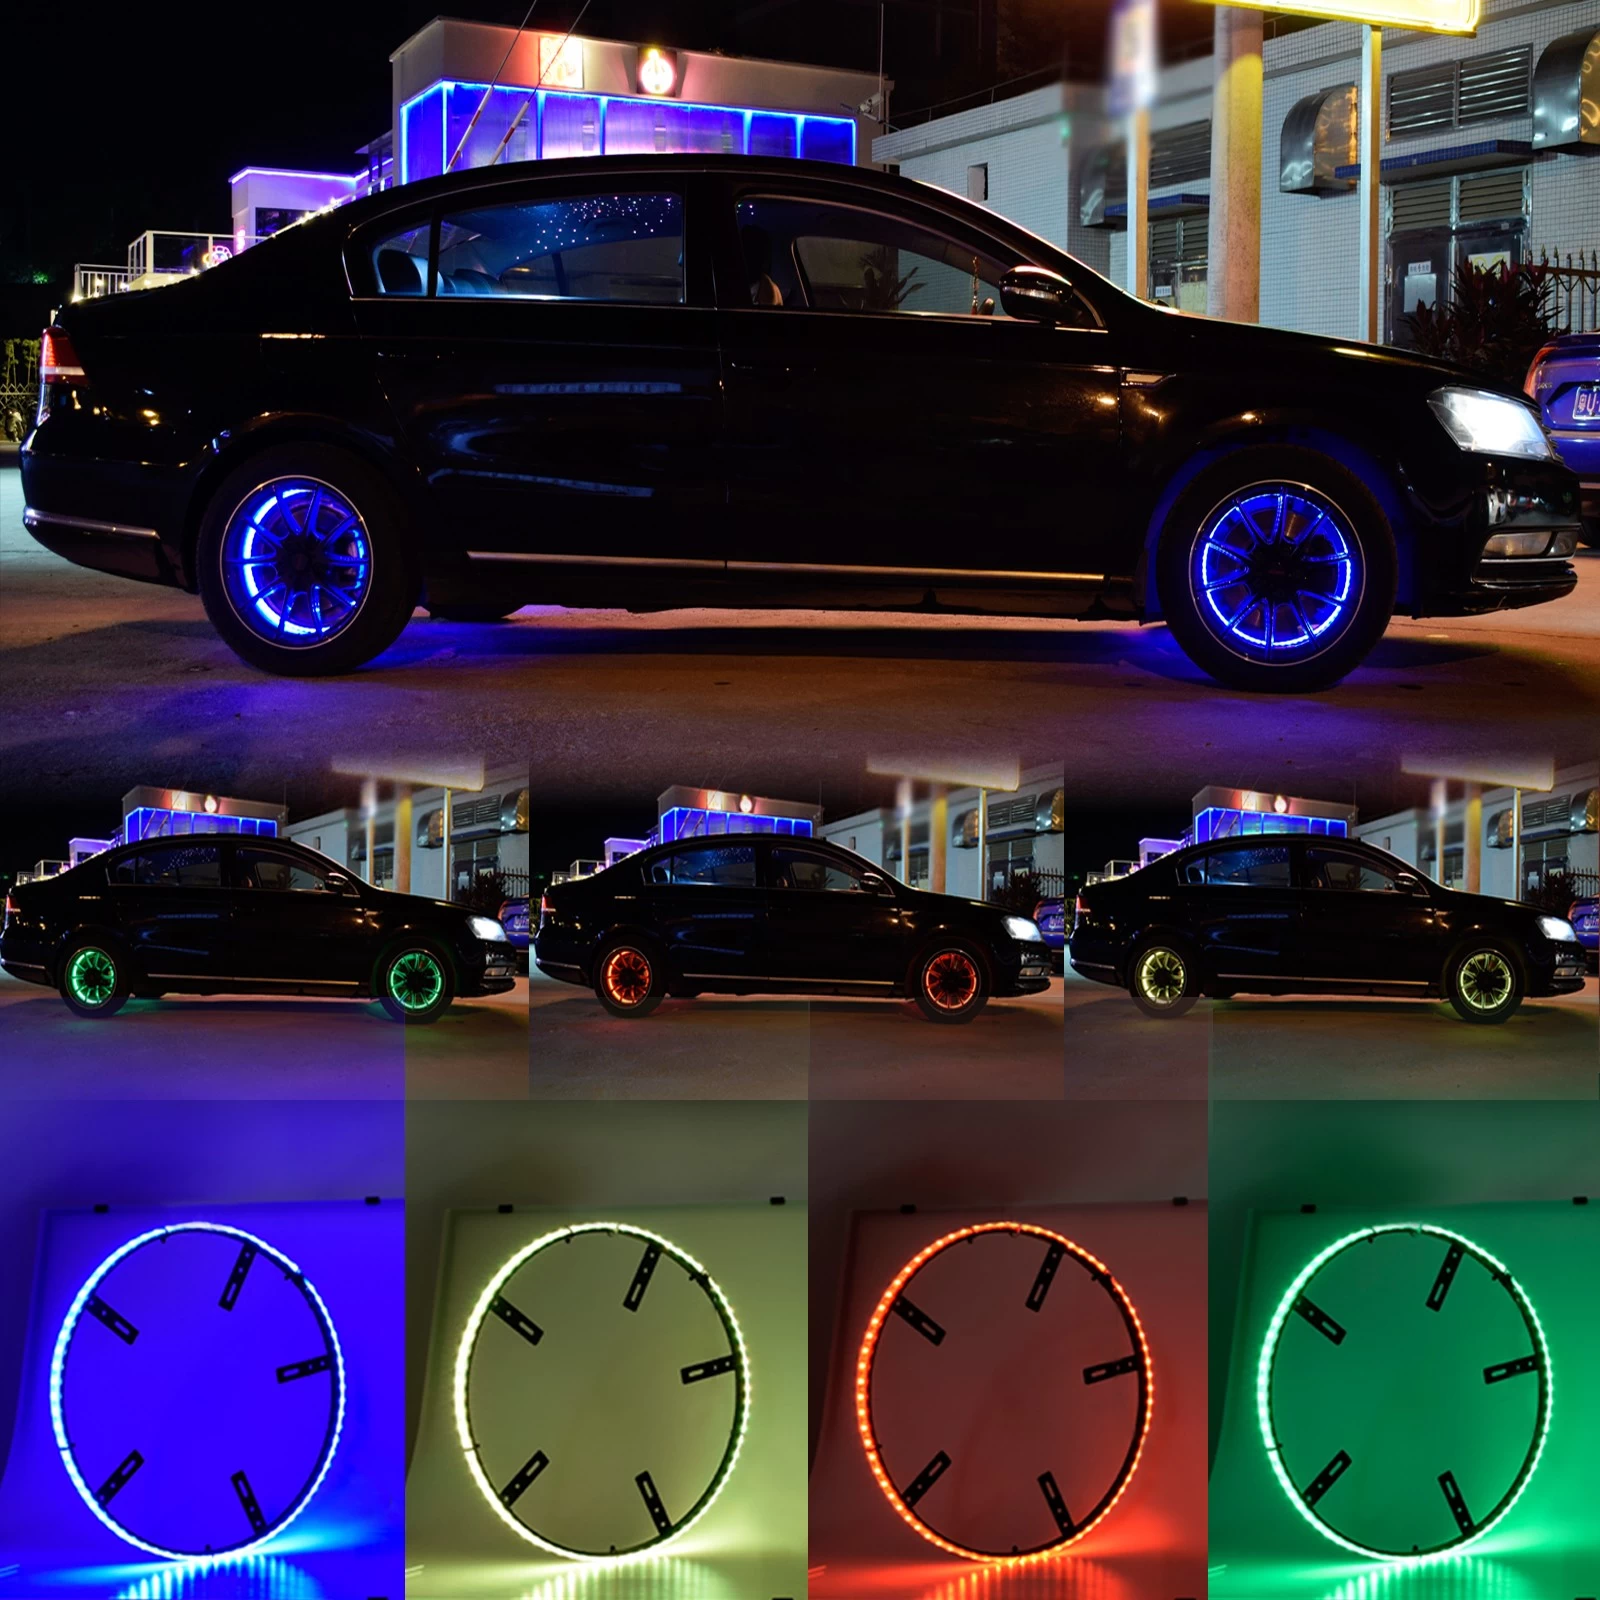 China Unionlux 14.5" 15.5inch LED Wheel Ring Light Kit RGB LED Wheel Ring Light Kit Tire Lights Turn Signal And Braking Function Can Controlled By Bluetooth Multi Mode Color Waterproof fabrikant